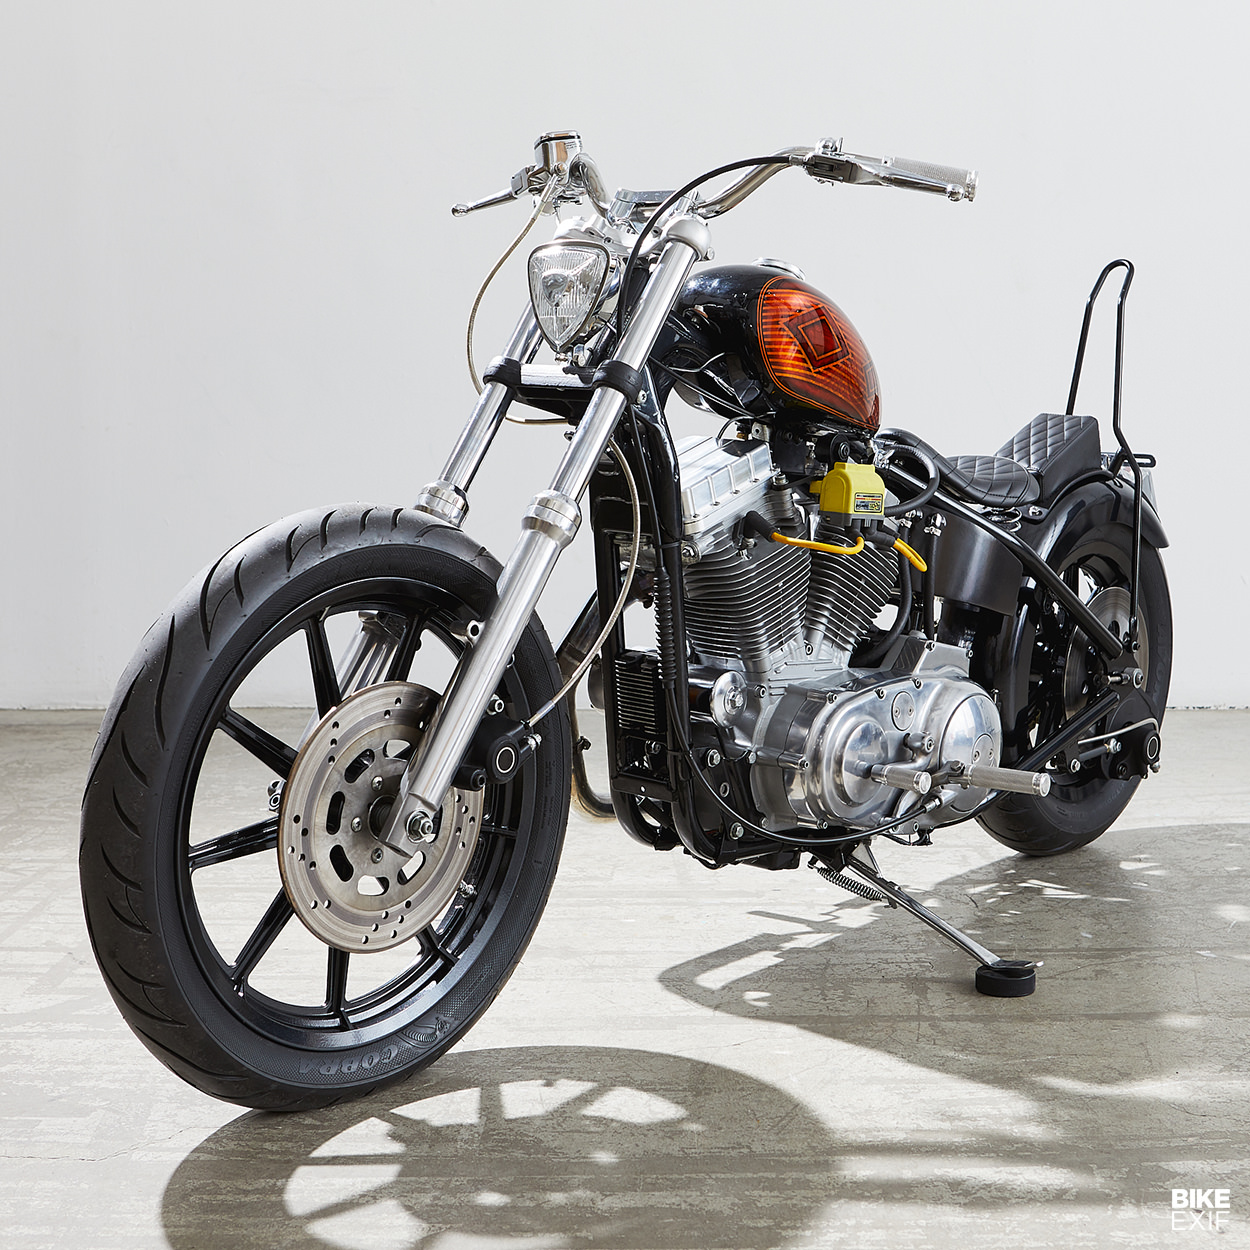 Harley 883 bobber by Canadian Nick Acosta of Augment Collective